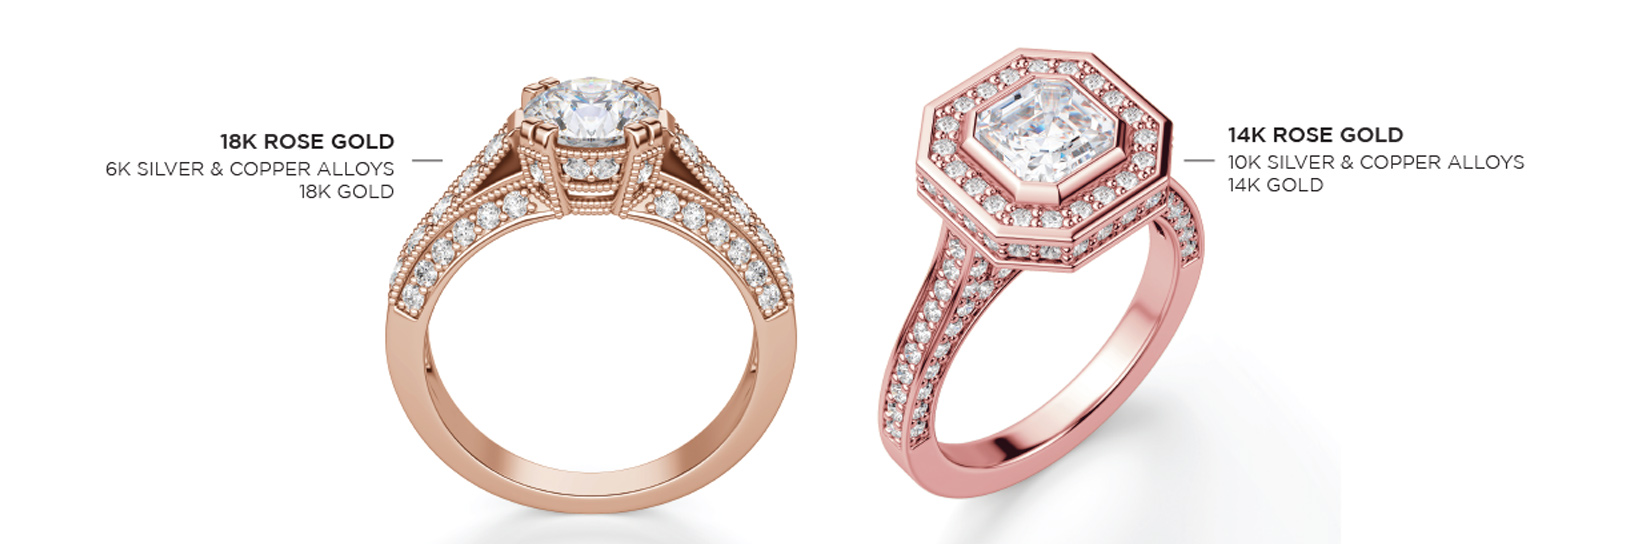 An 18K rose gold ring and a 14K rose gold ring side by side